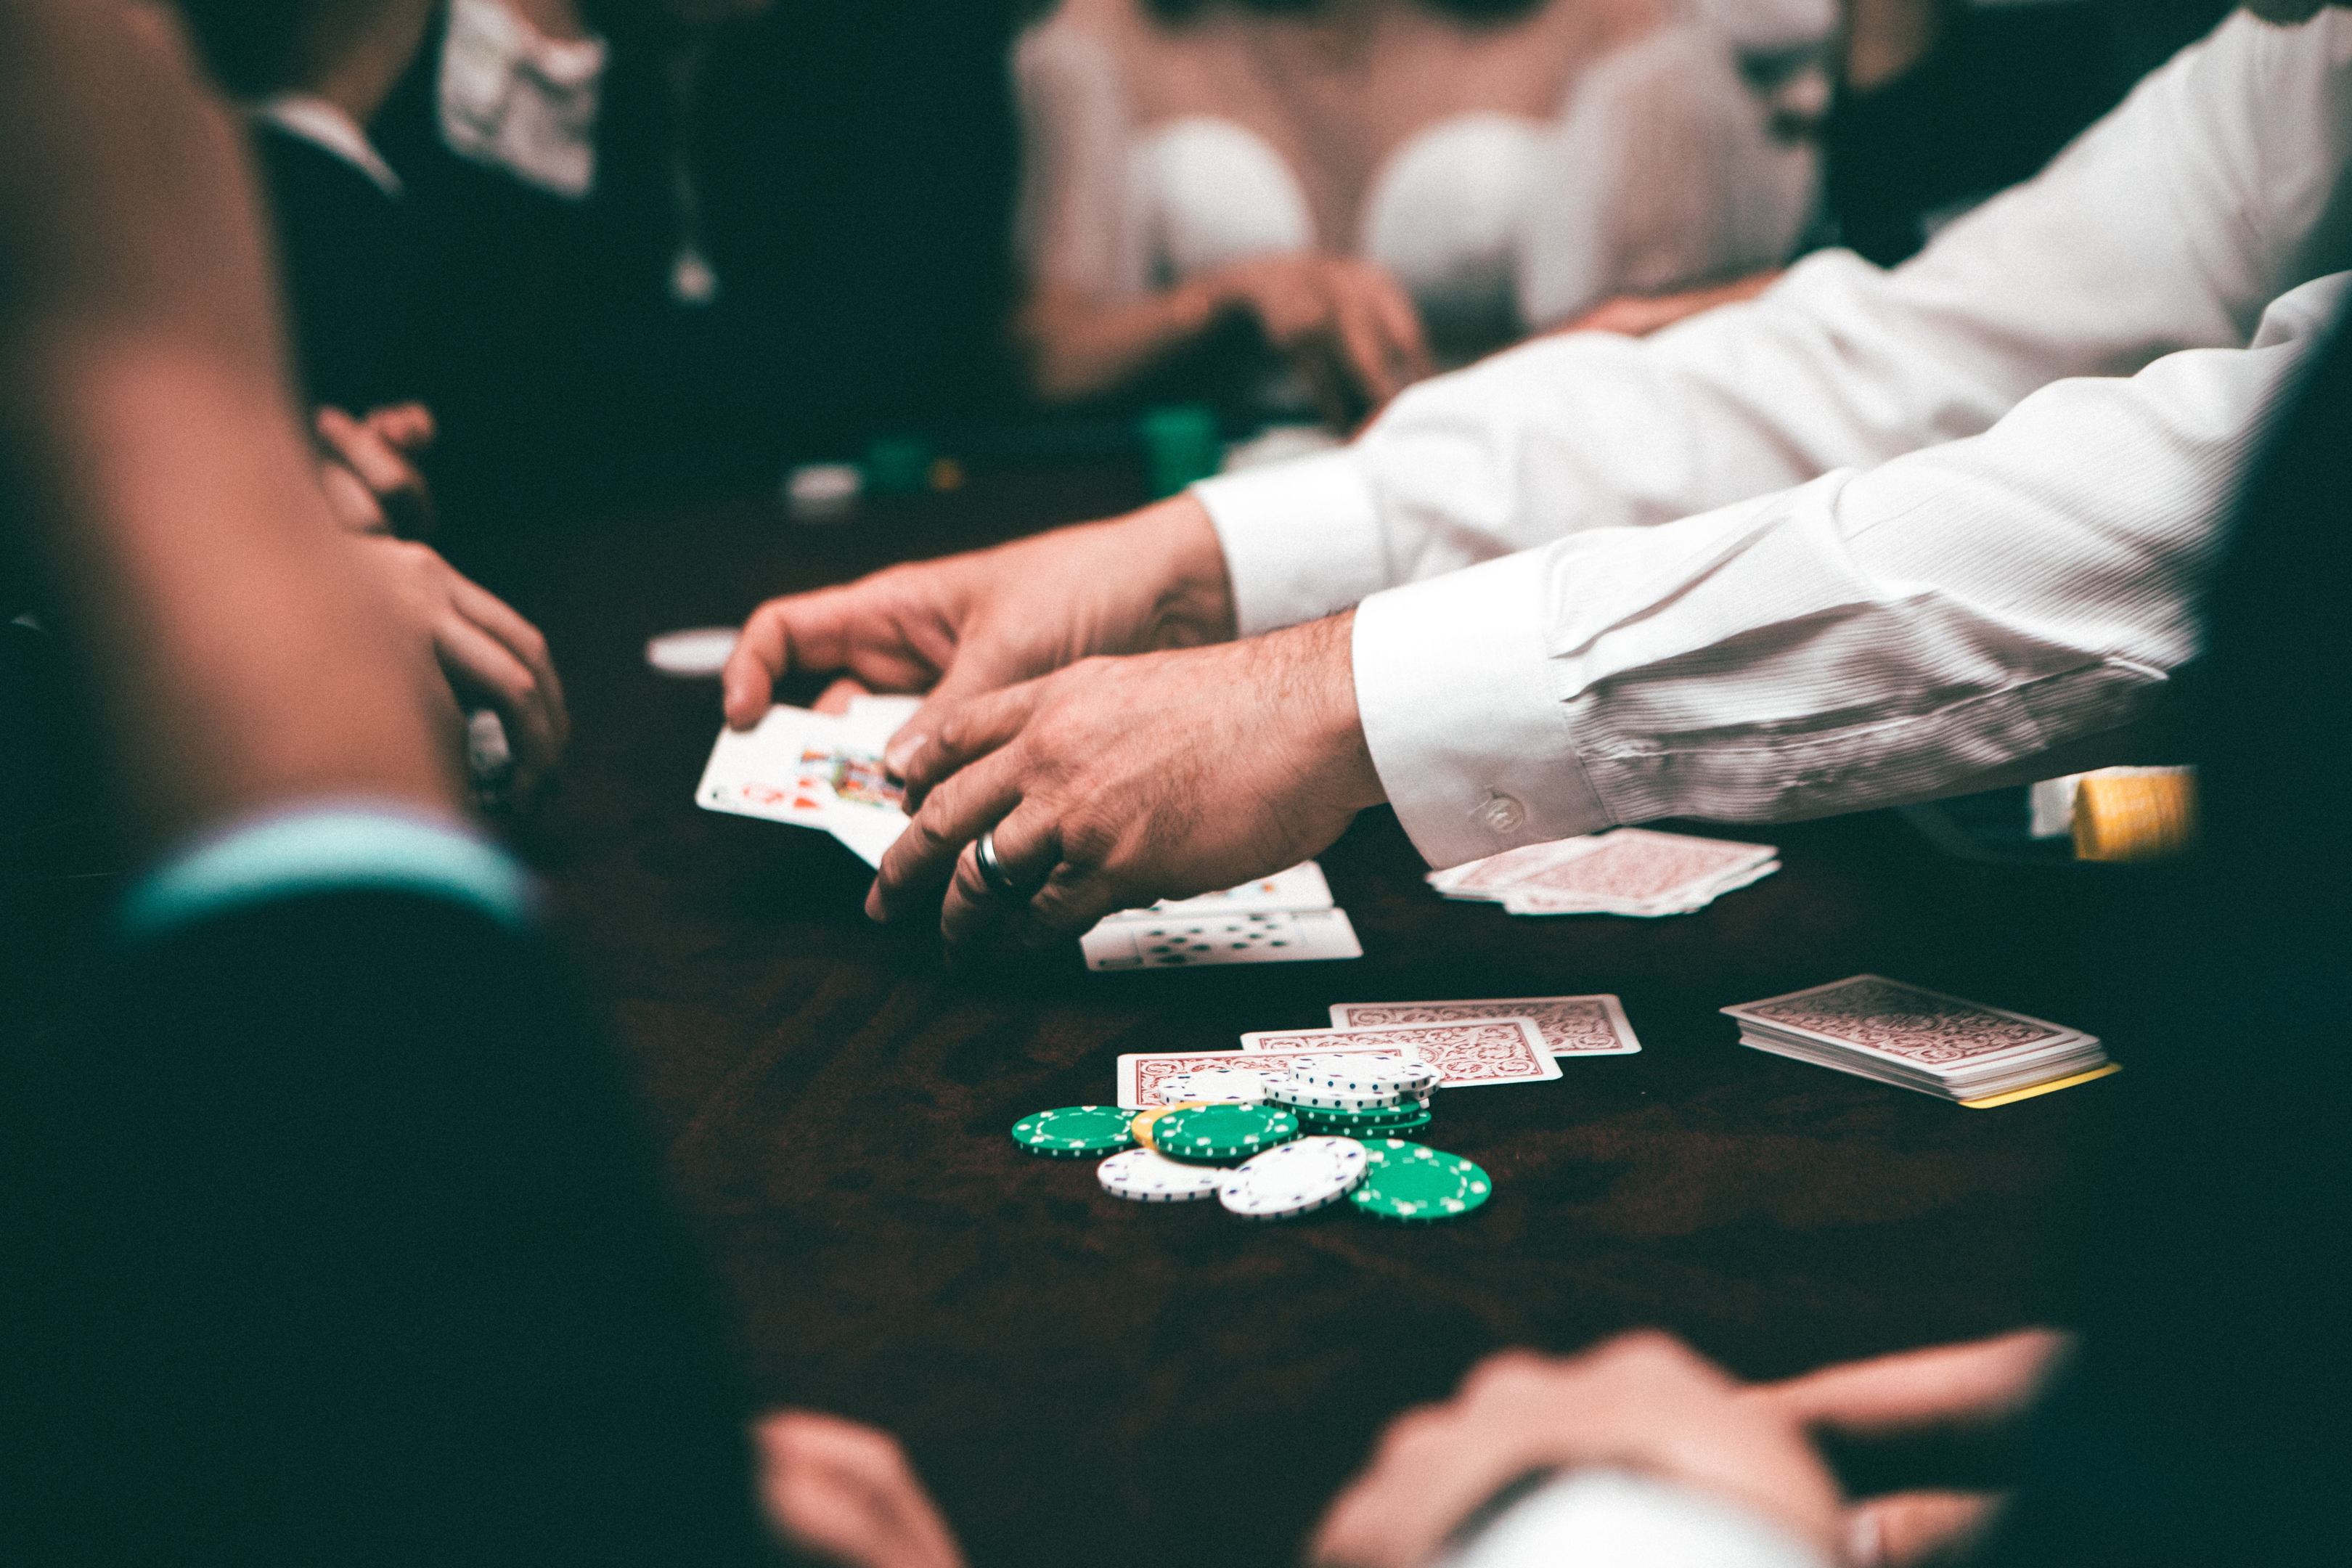 Gambling operations, physical or via an online gaming account, requires licenses to legally operate | Photo by Javon Swaby from Pexels